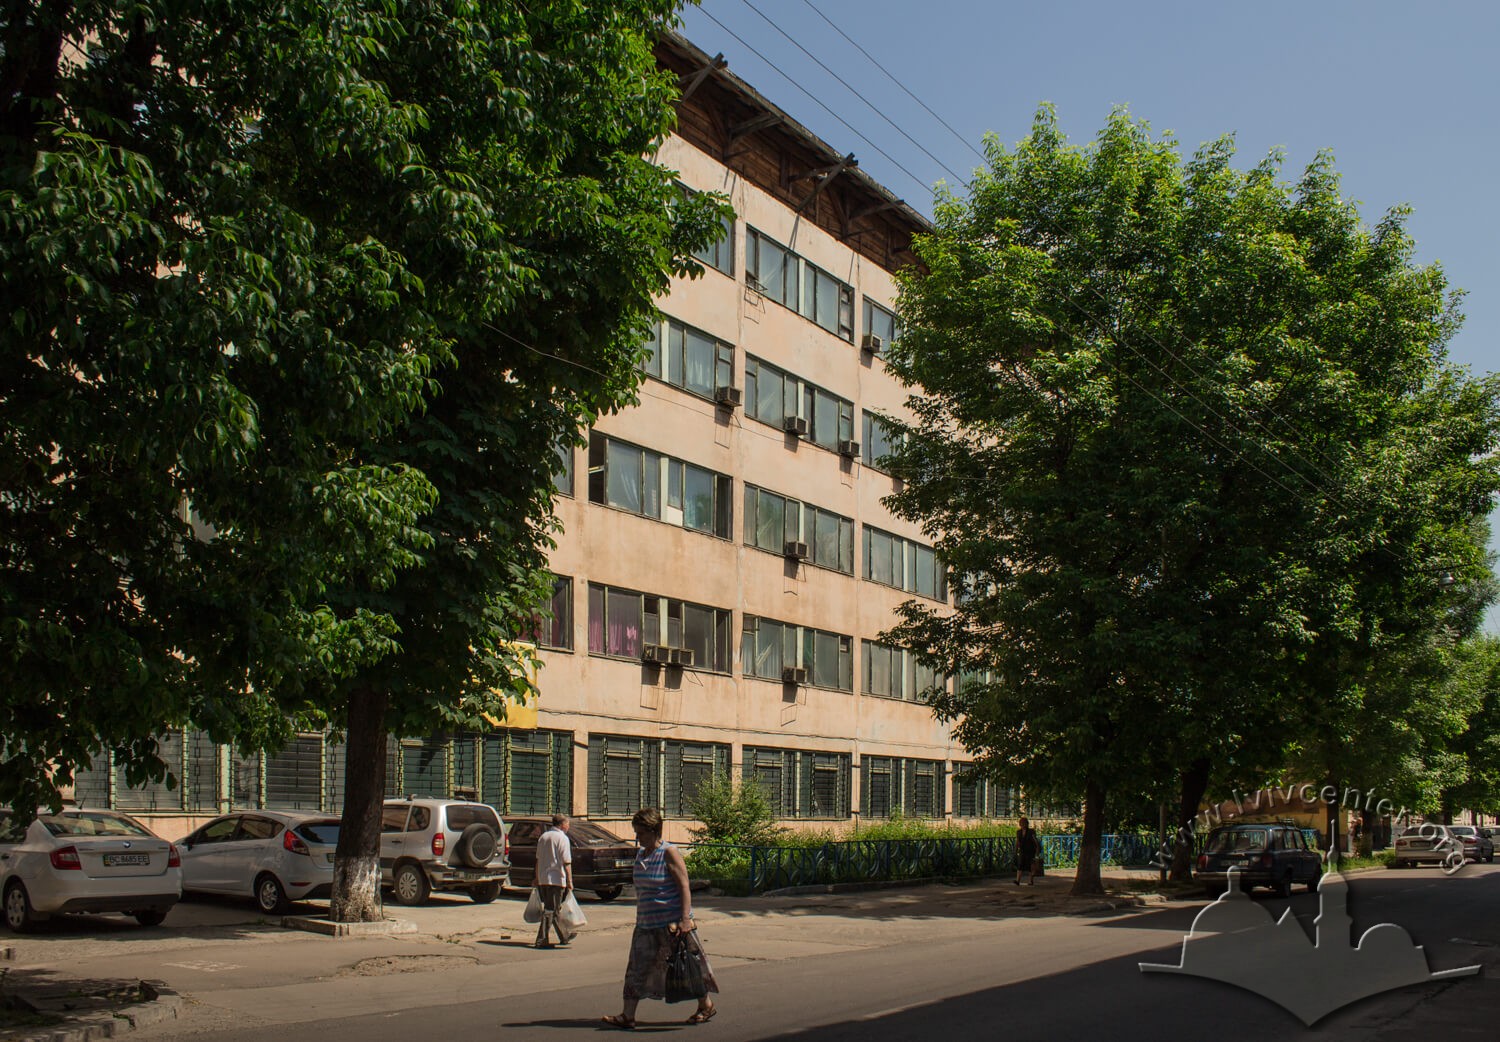 Vul. Zavodska. Before the construction of this REMA plant building, there used to be a few smaller buildings, the Kuznicki roofing felt factory was located in one of them (#33)/Photo courtesy of Olha Zarechnyuk, 2016